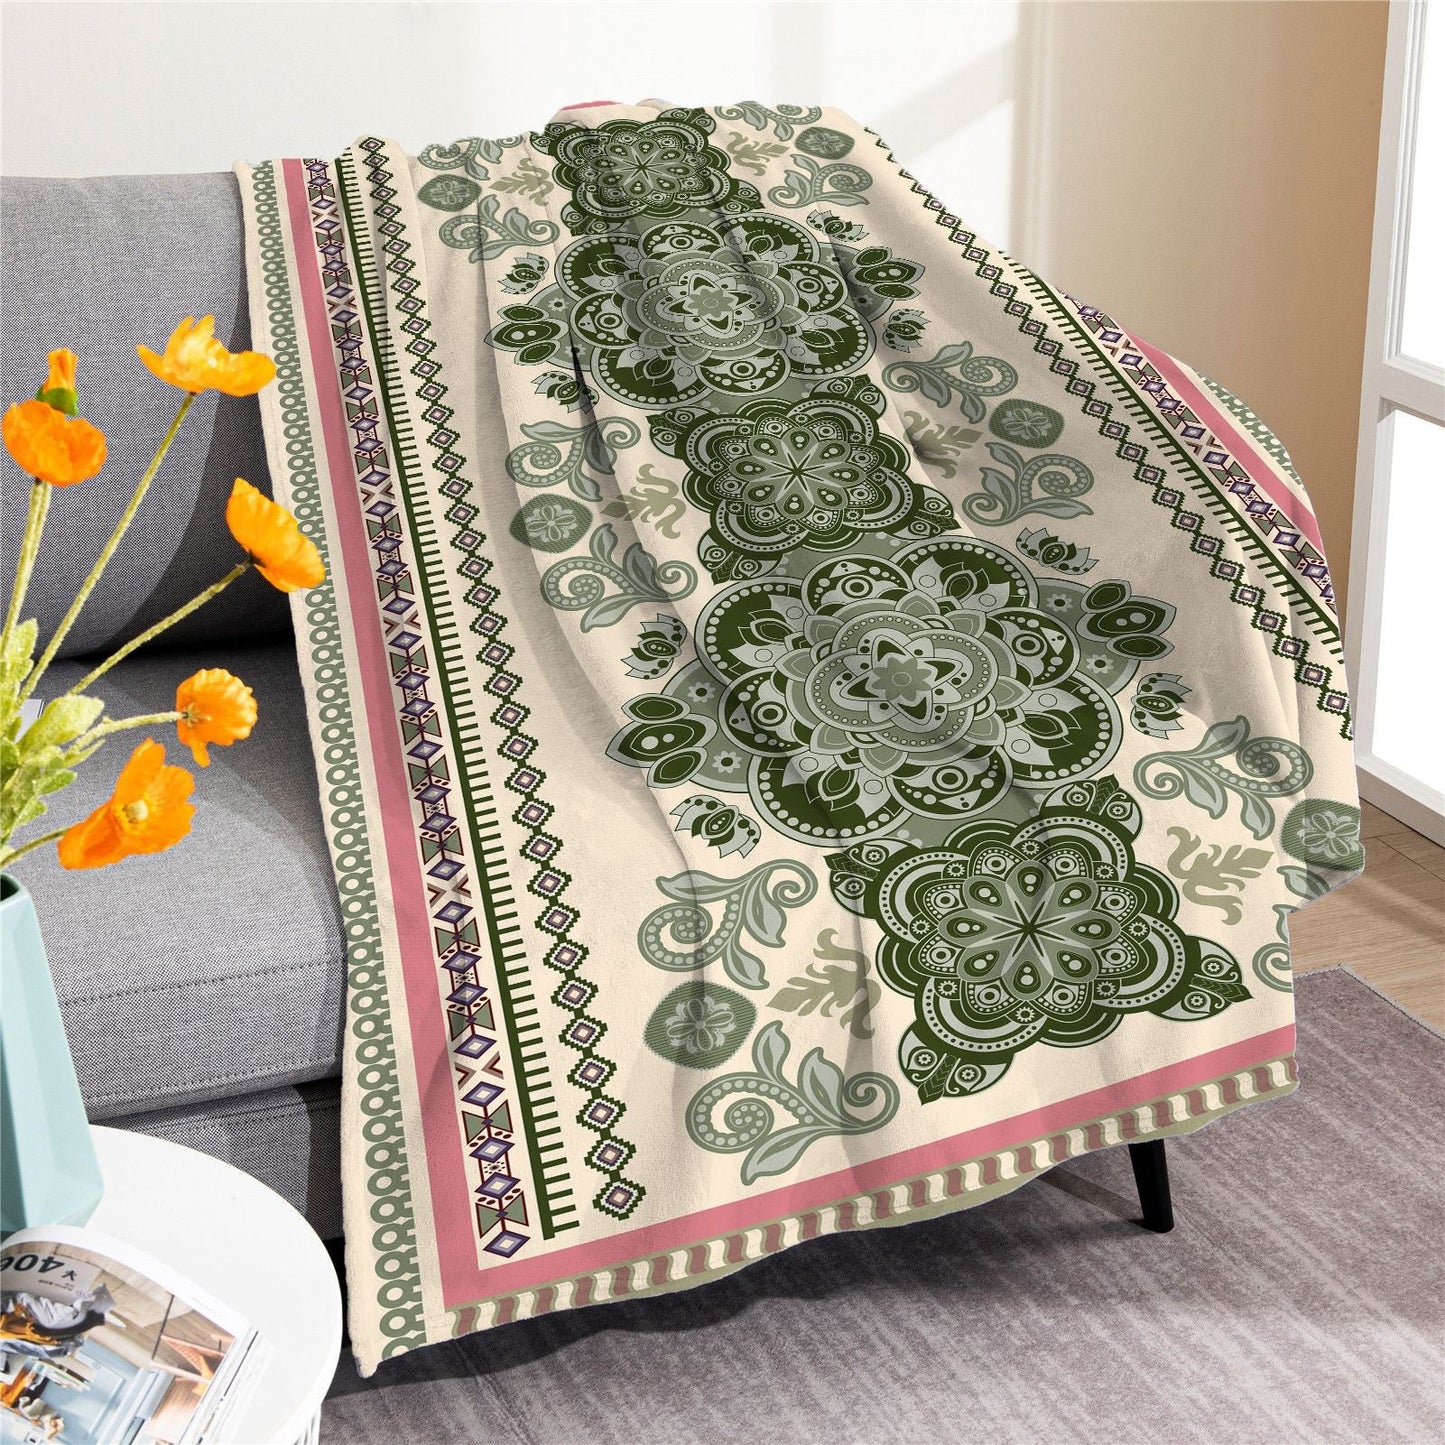 Vintage Boho Fleece Throw Blankets-Blankets-M20220701-31-50*60 Inches-Free Shipping at meselling99